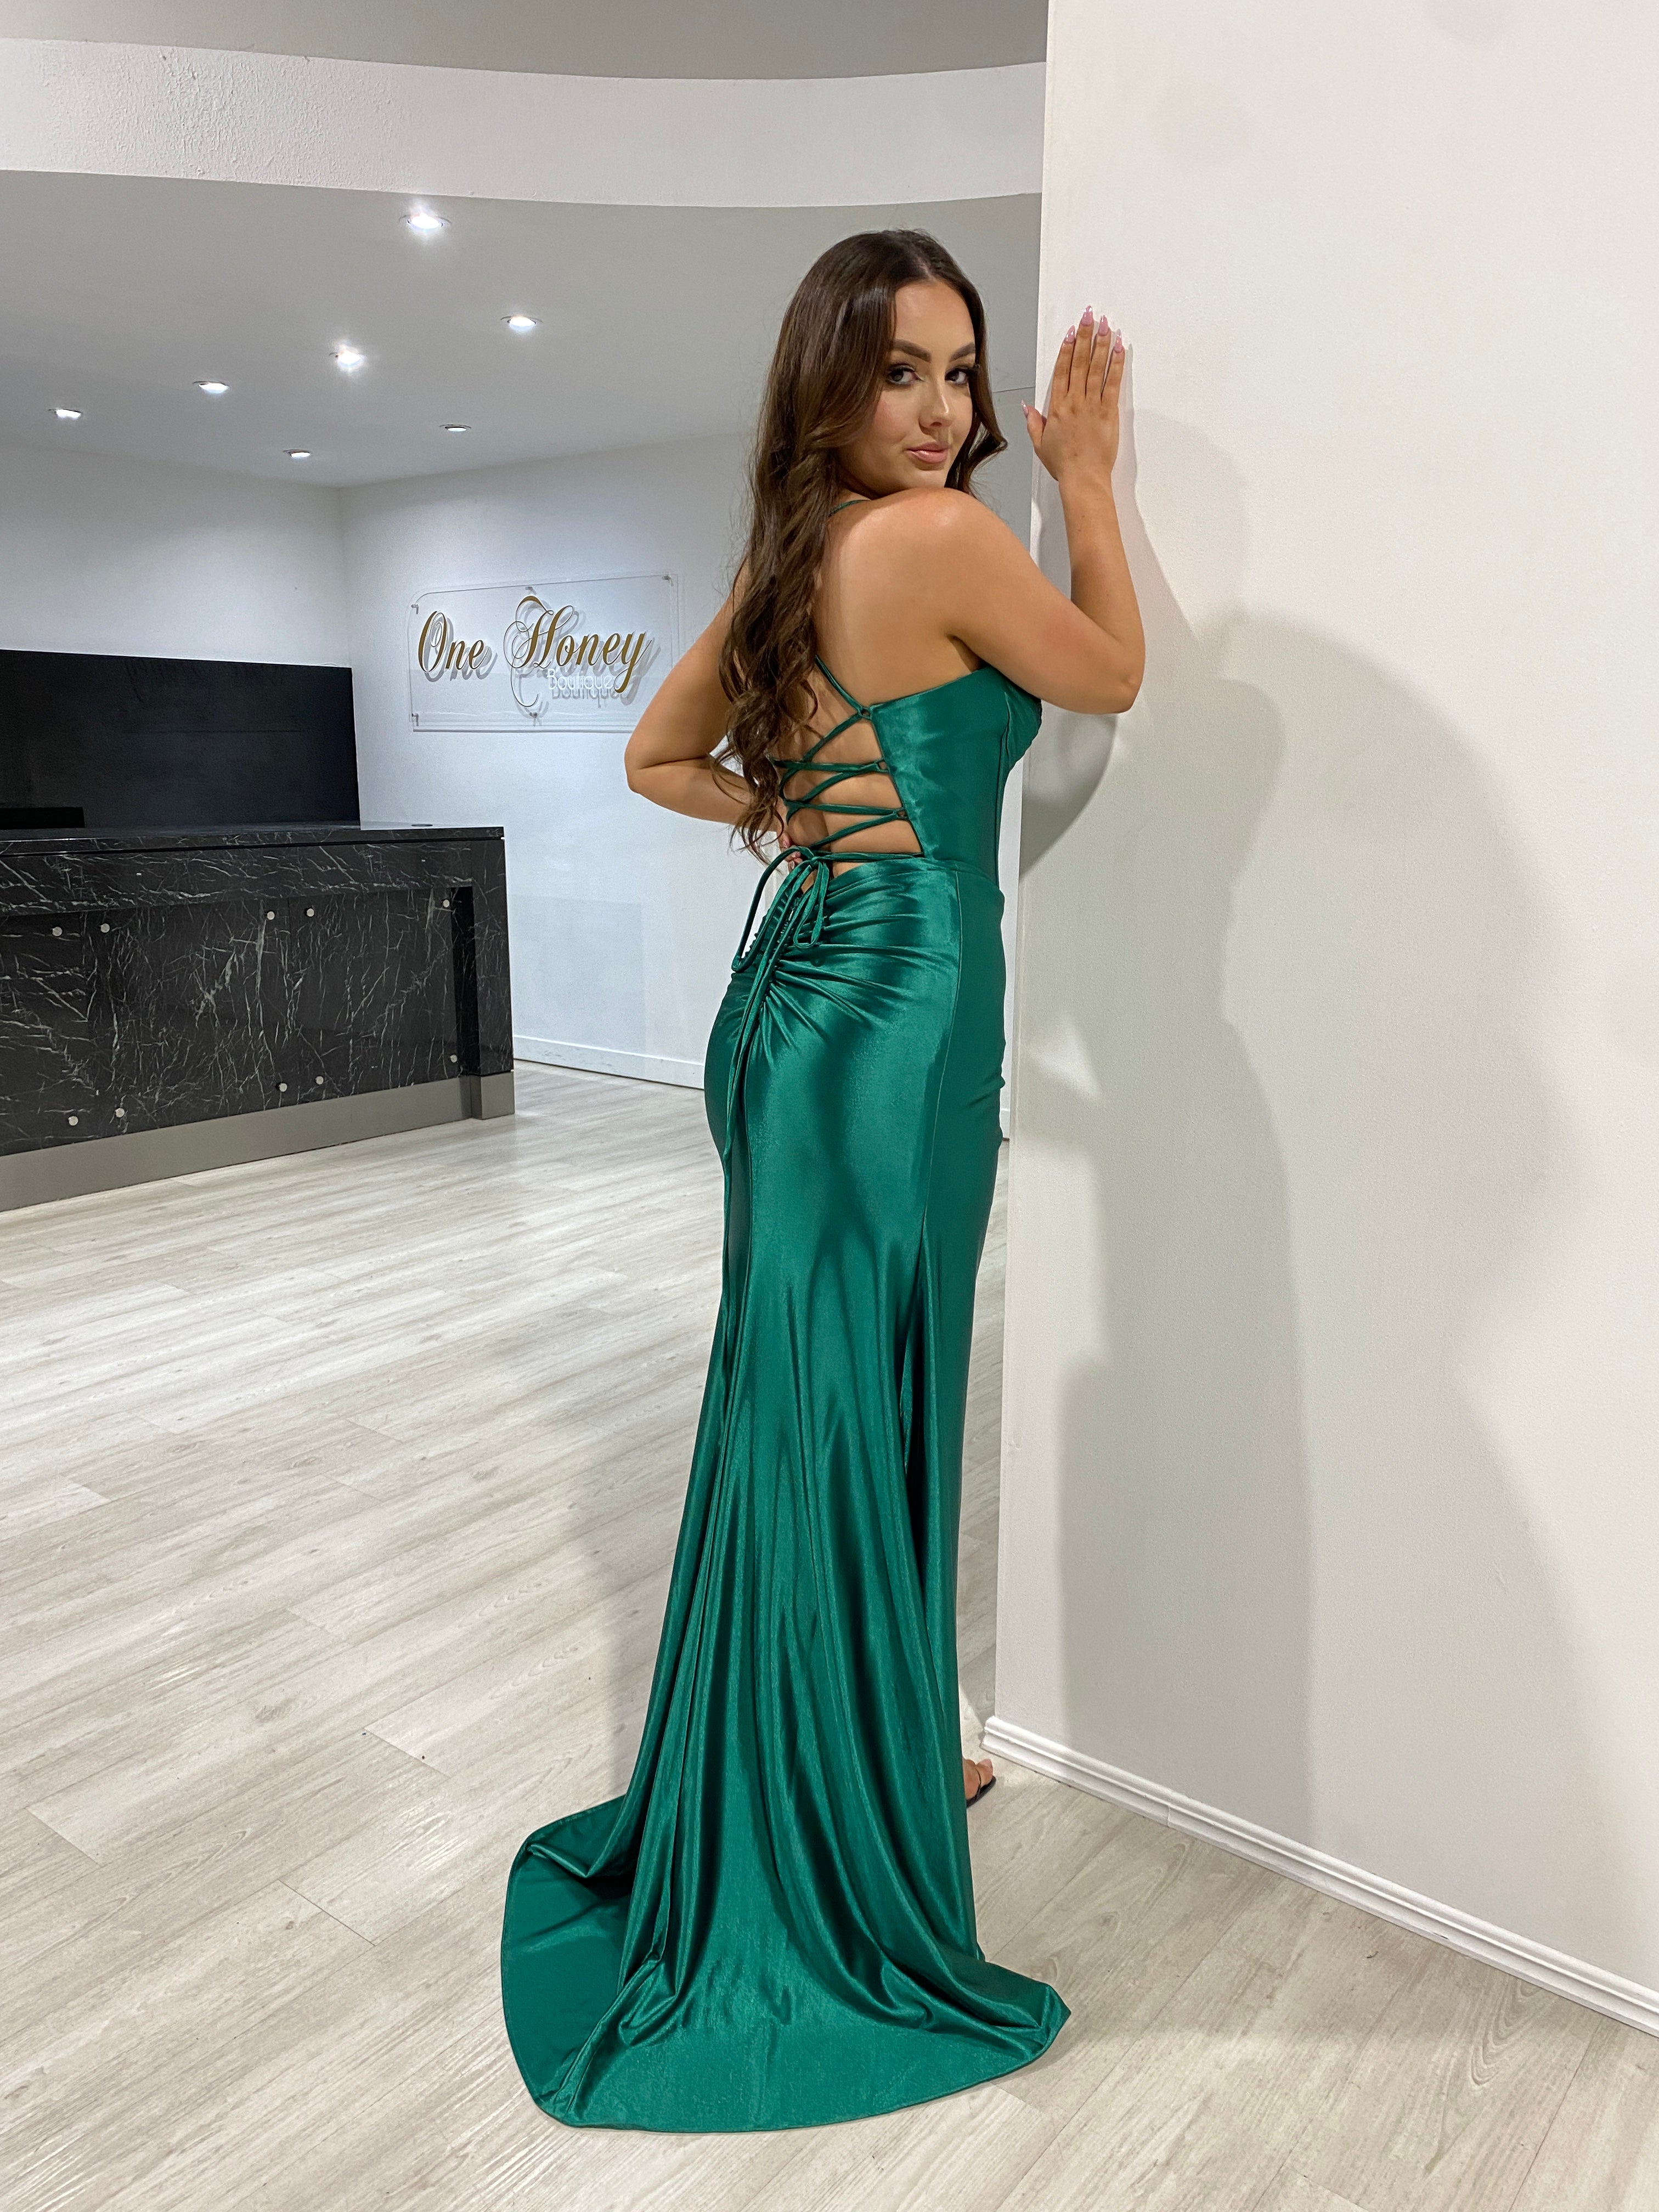 Honey Couture RAFAELLA Emerald Crystal Diamante Bustier Corset Lace Up Back Silky Mermaid Formal Dress